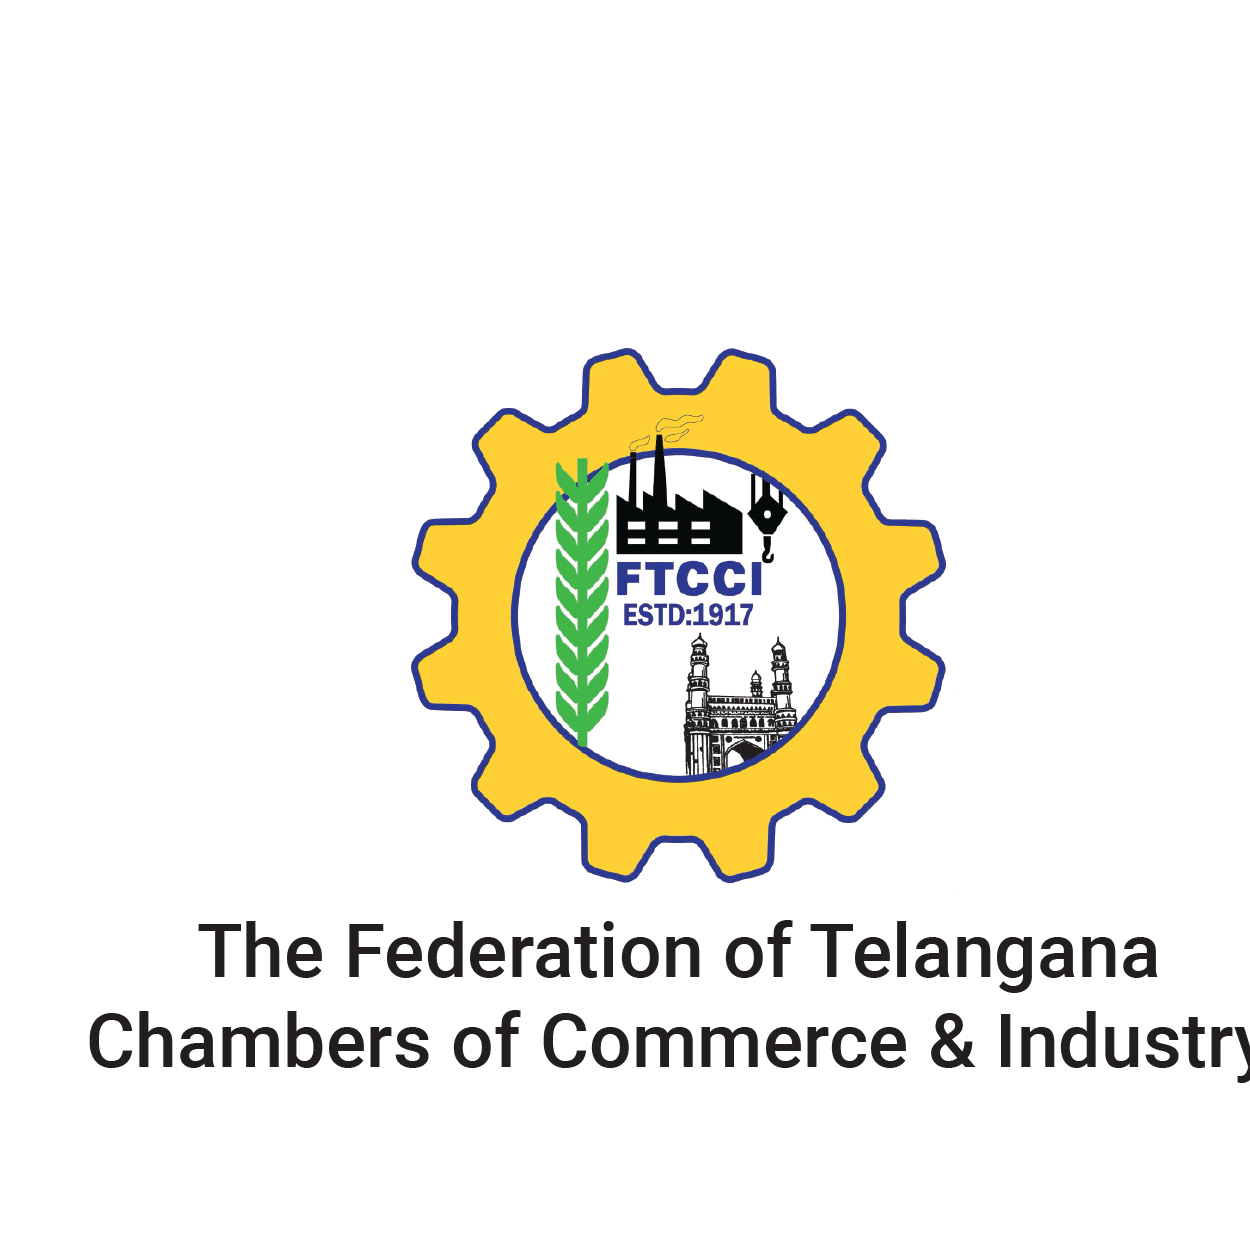 FTCCI to Host the First Ever Experiential Tourism MICE Conclave in Hyderabad